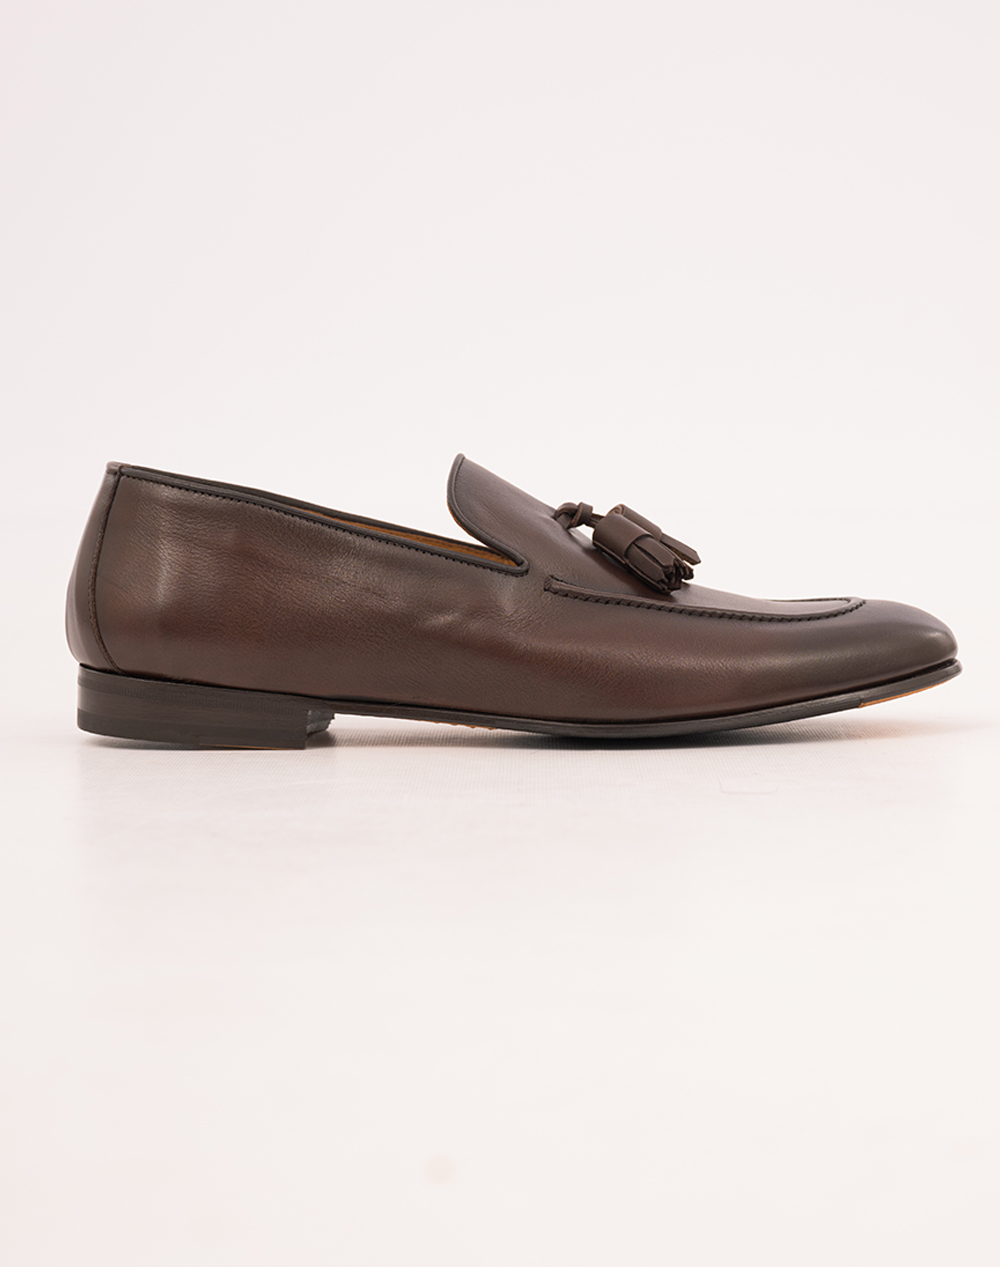 JUAN LACARCEL CALCE LOAFERS X1231-CACAO DarkBrown